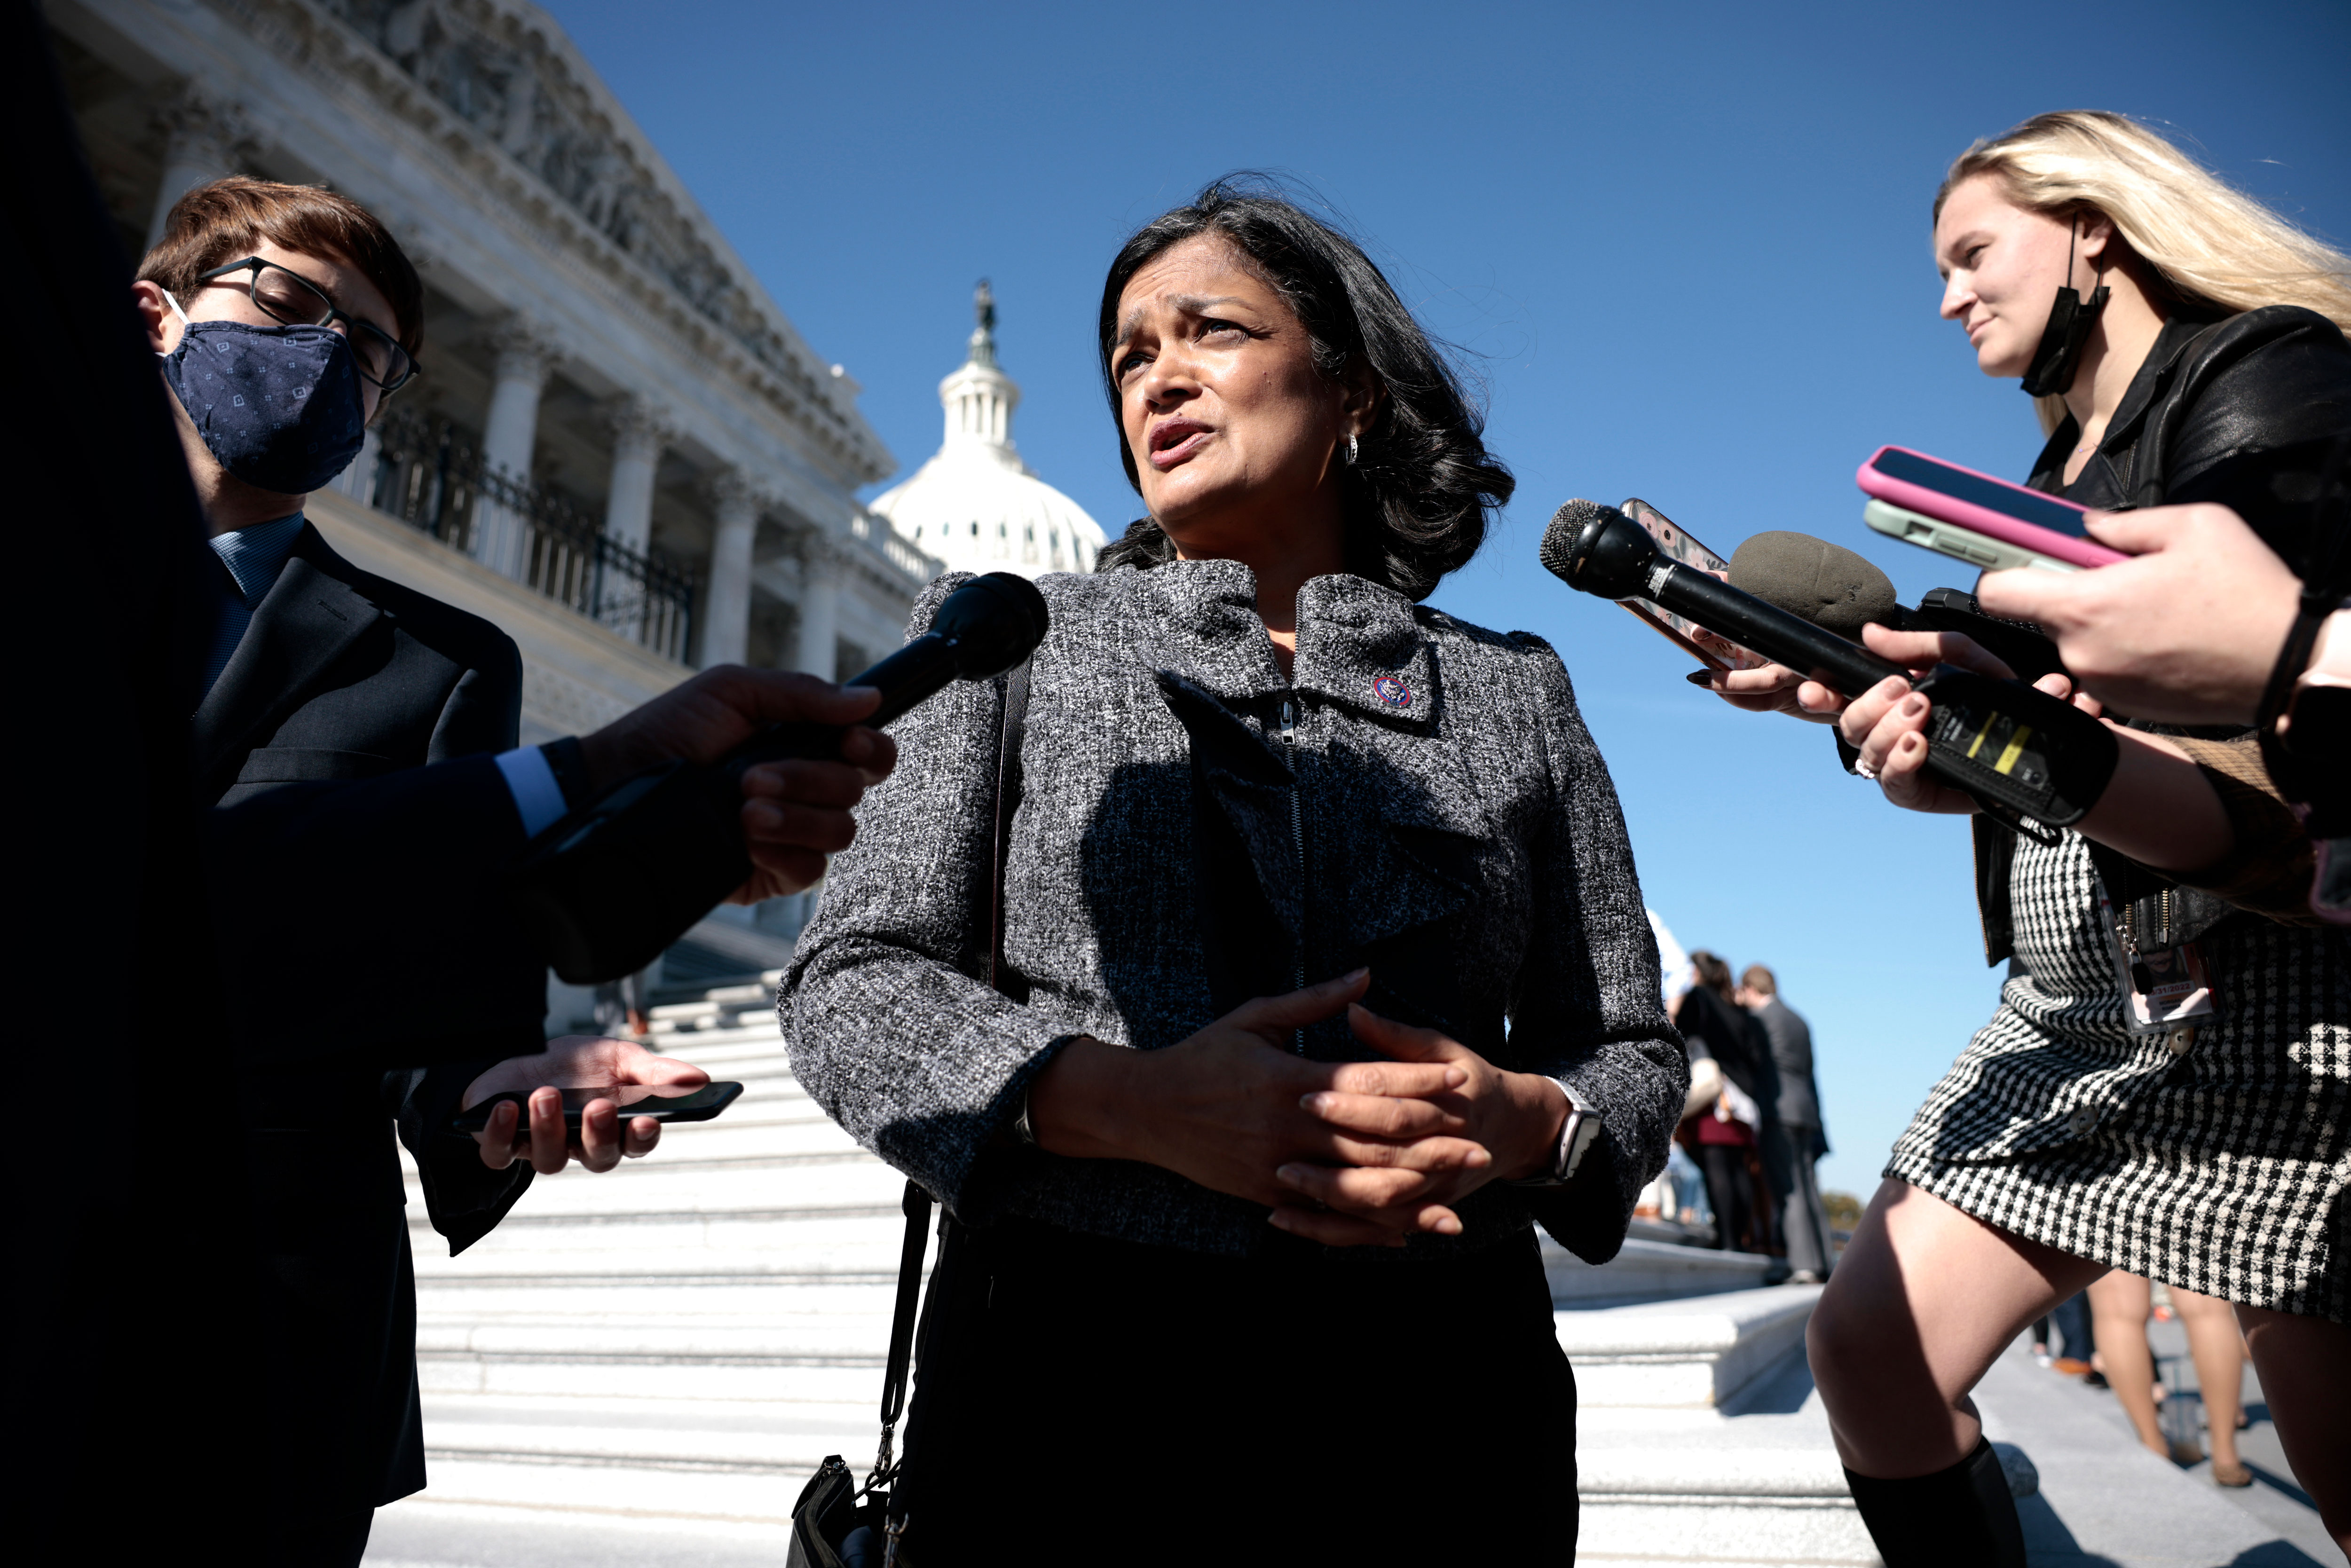 Congressional Progressive Caucus Chair Rep. Pramila Jayapal speaks with reporters outside the Capitol in Washington, DC, on November 18.